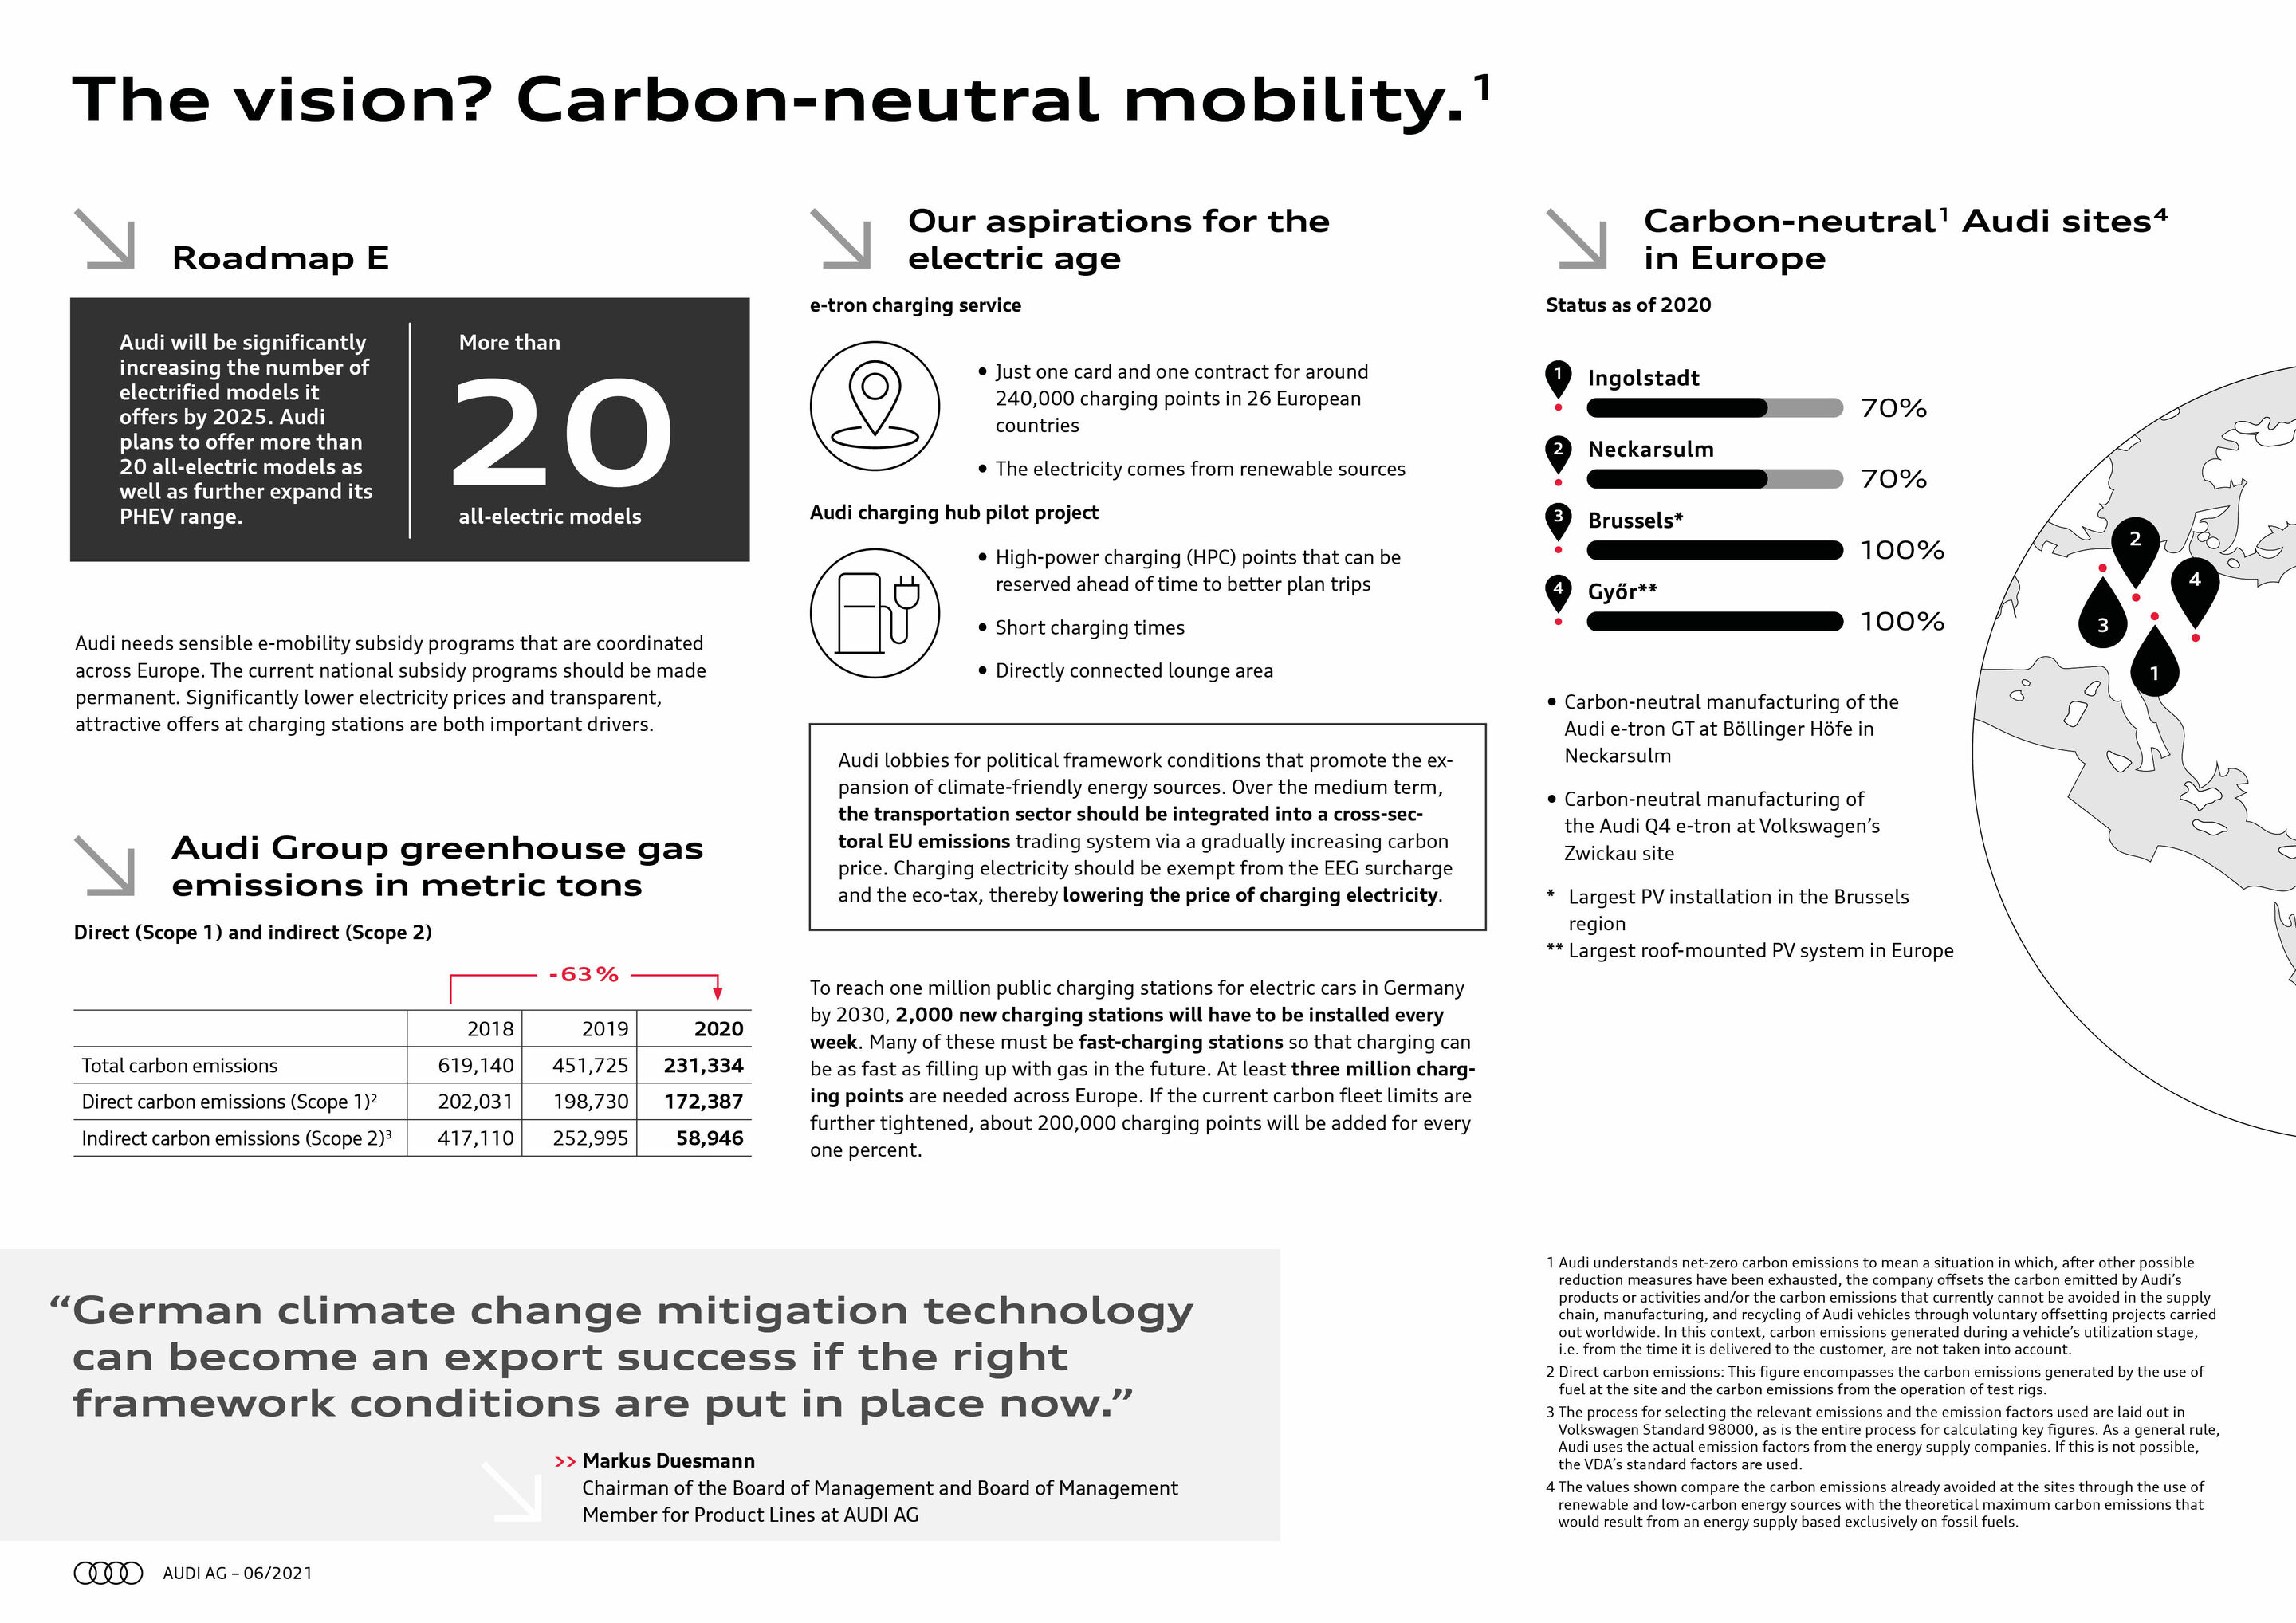 The vision? Carbon-neutral mobility (2 / 2)